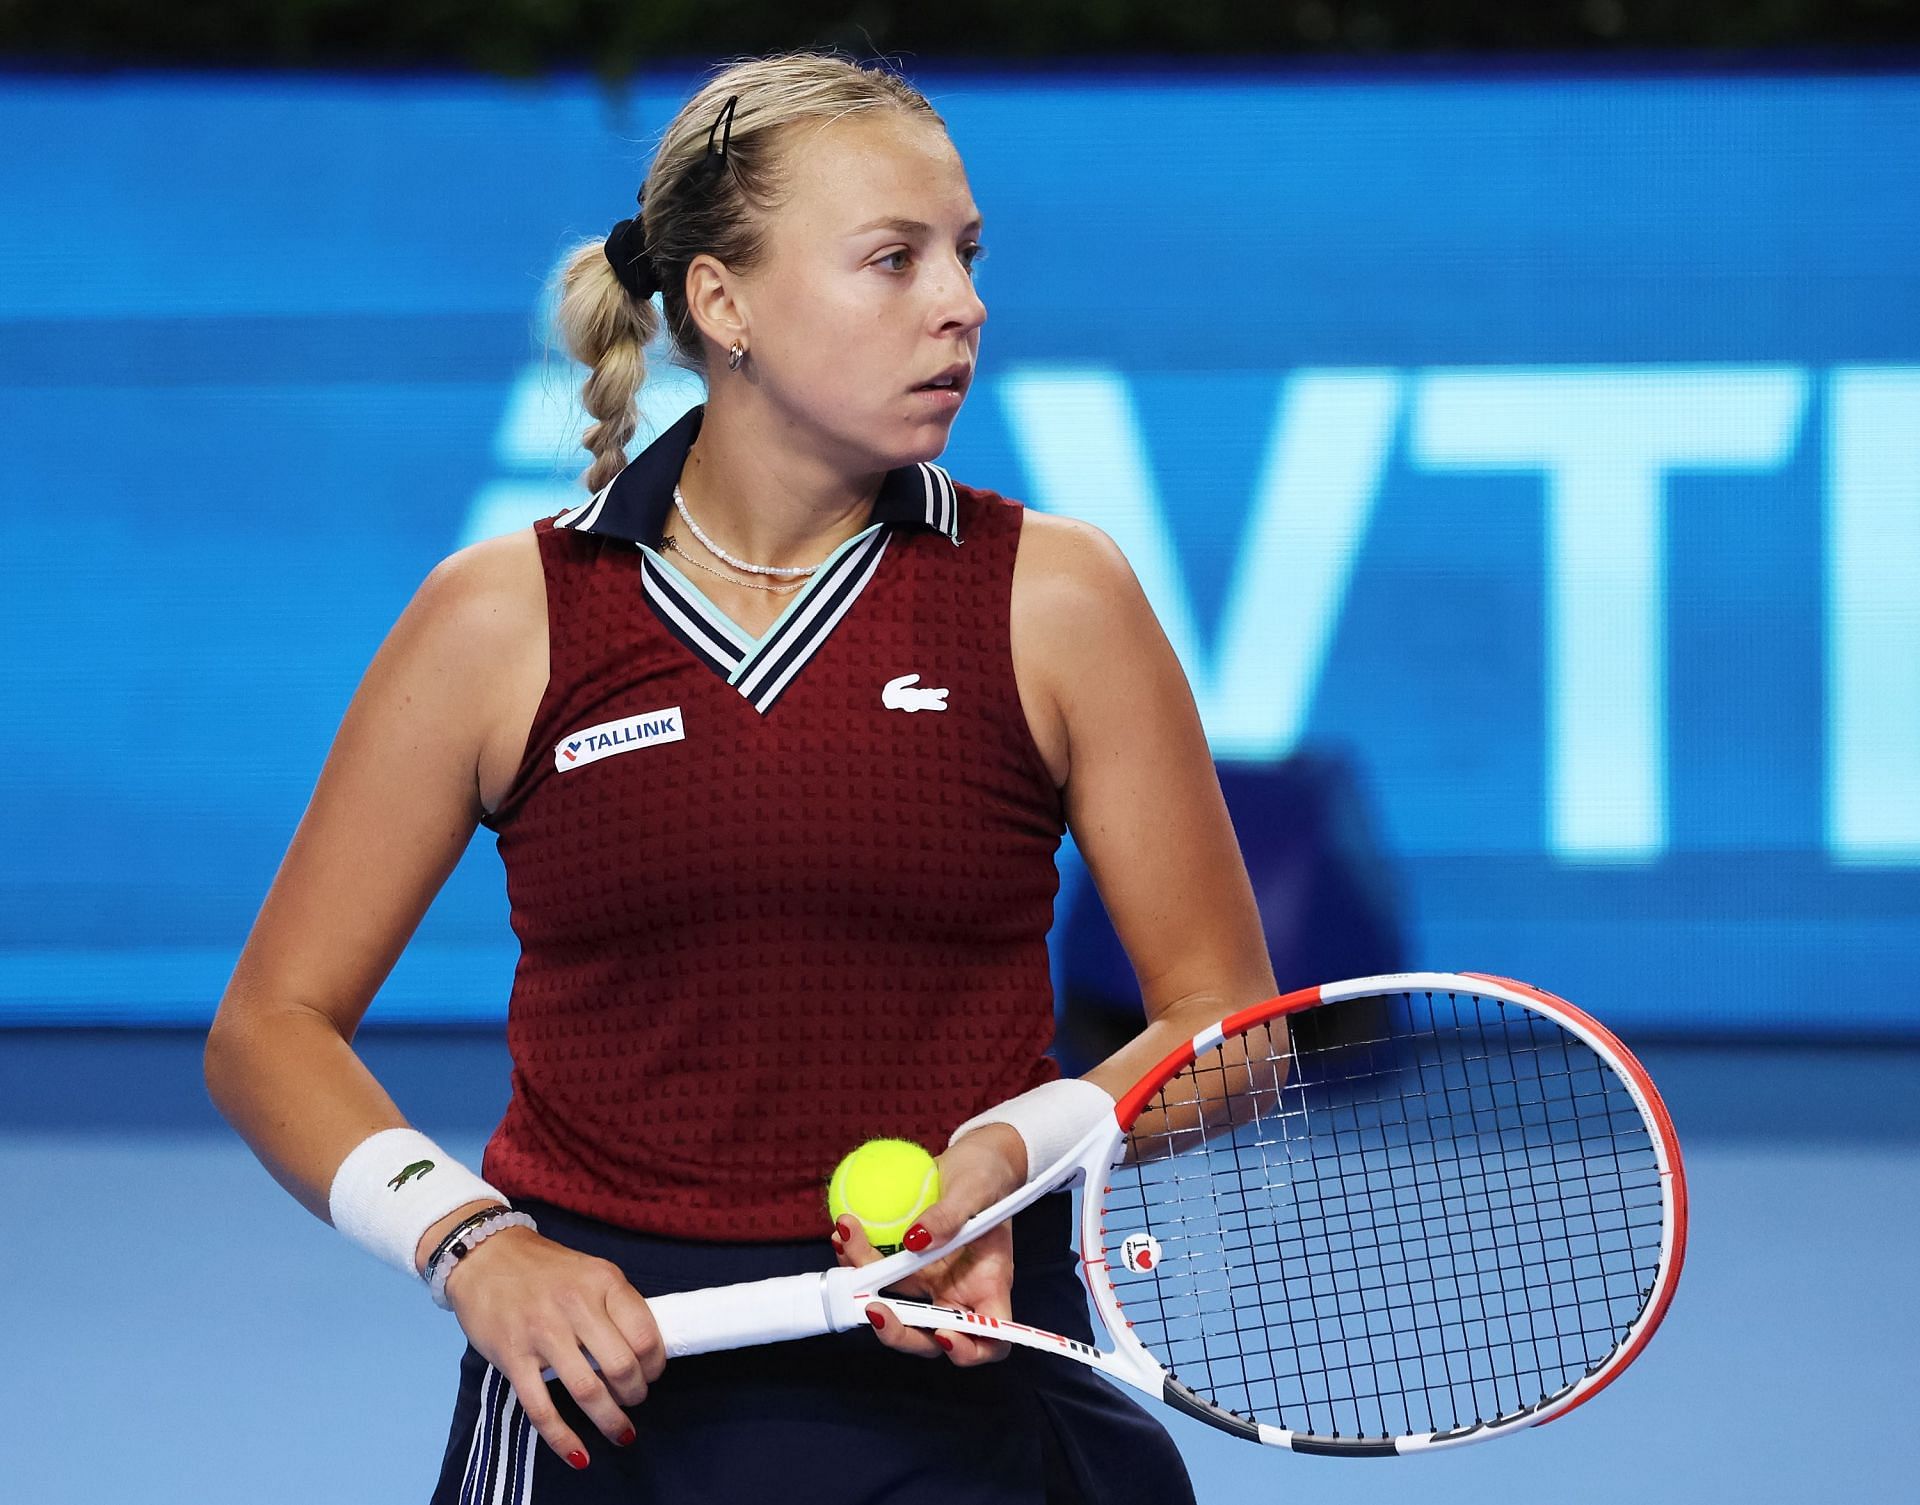 Anett Kontaveit in action at the VTB Kremlin Cup